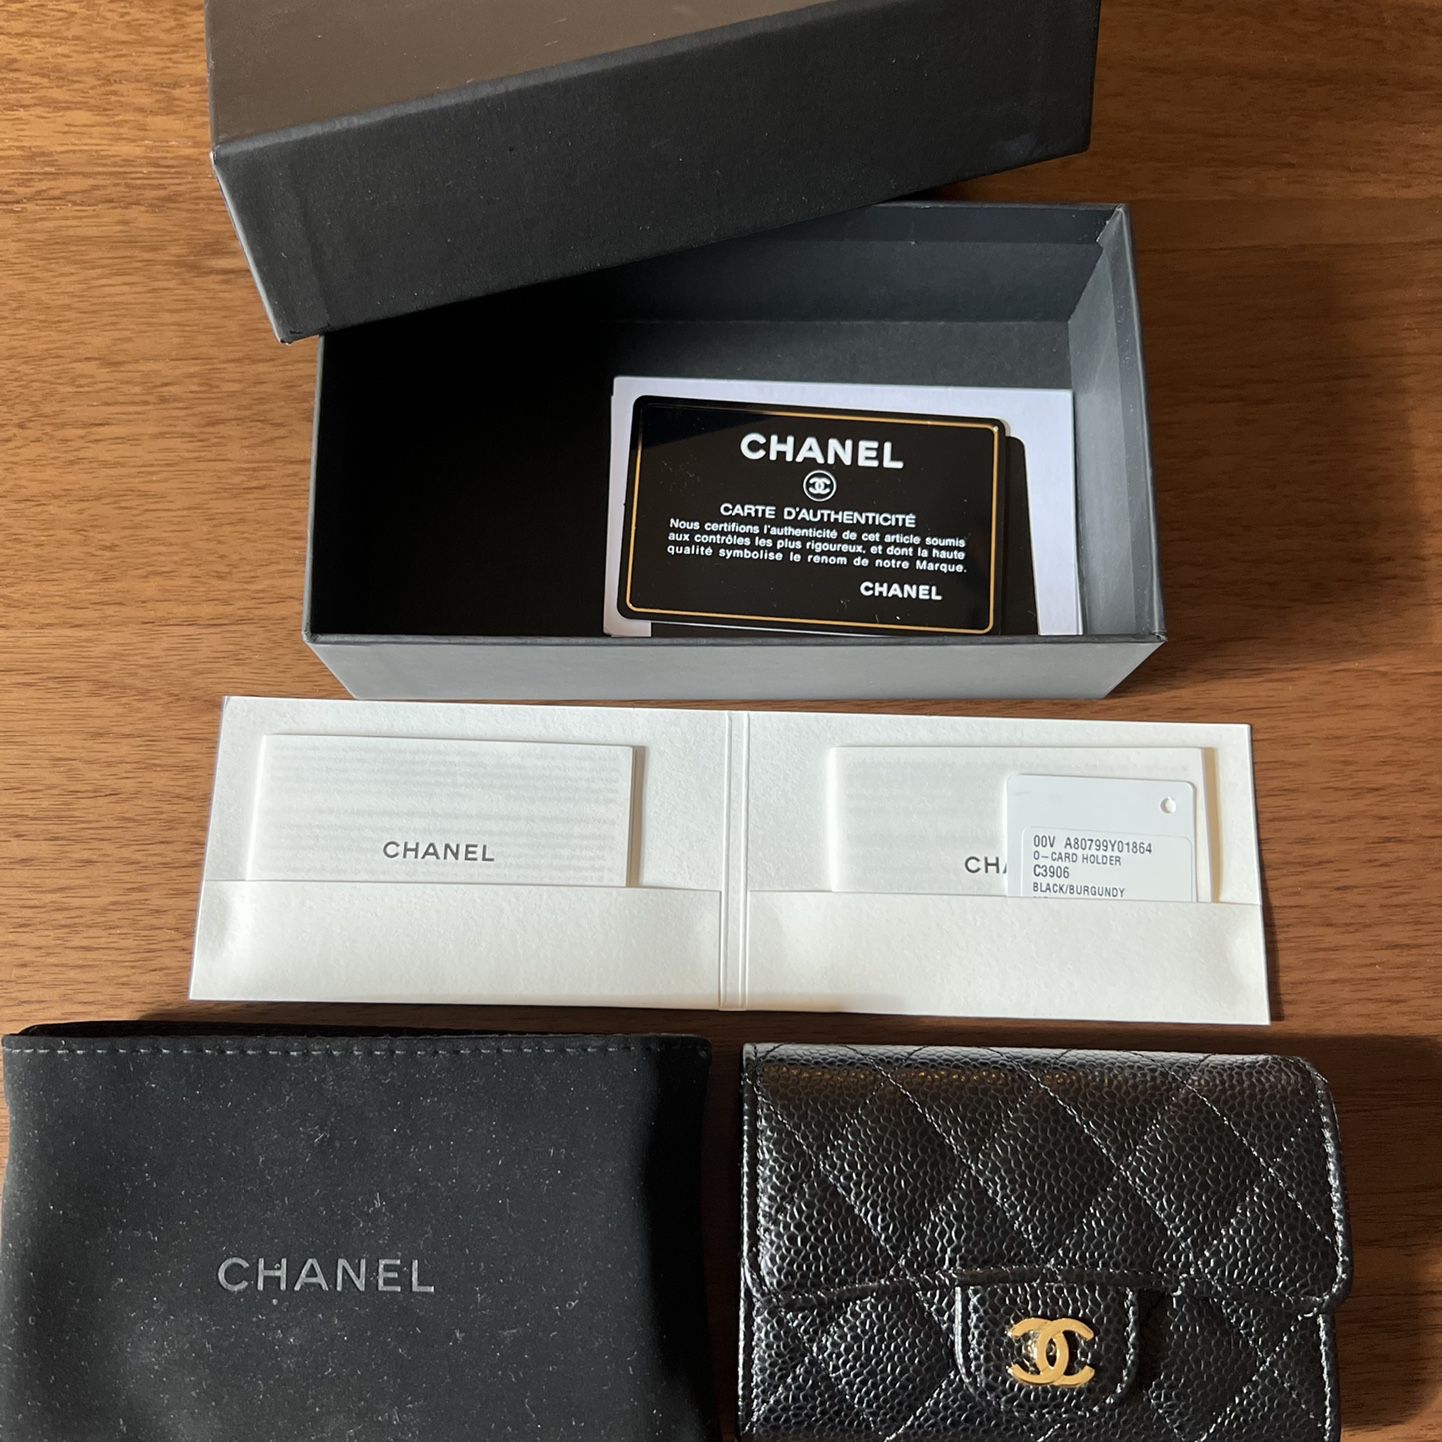 New Chanel Black Caviar Leather Gold Metal Cardholder With Box, Dust Cover, Authenticity Card